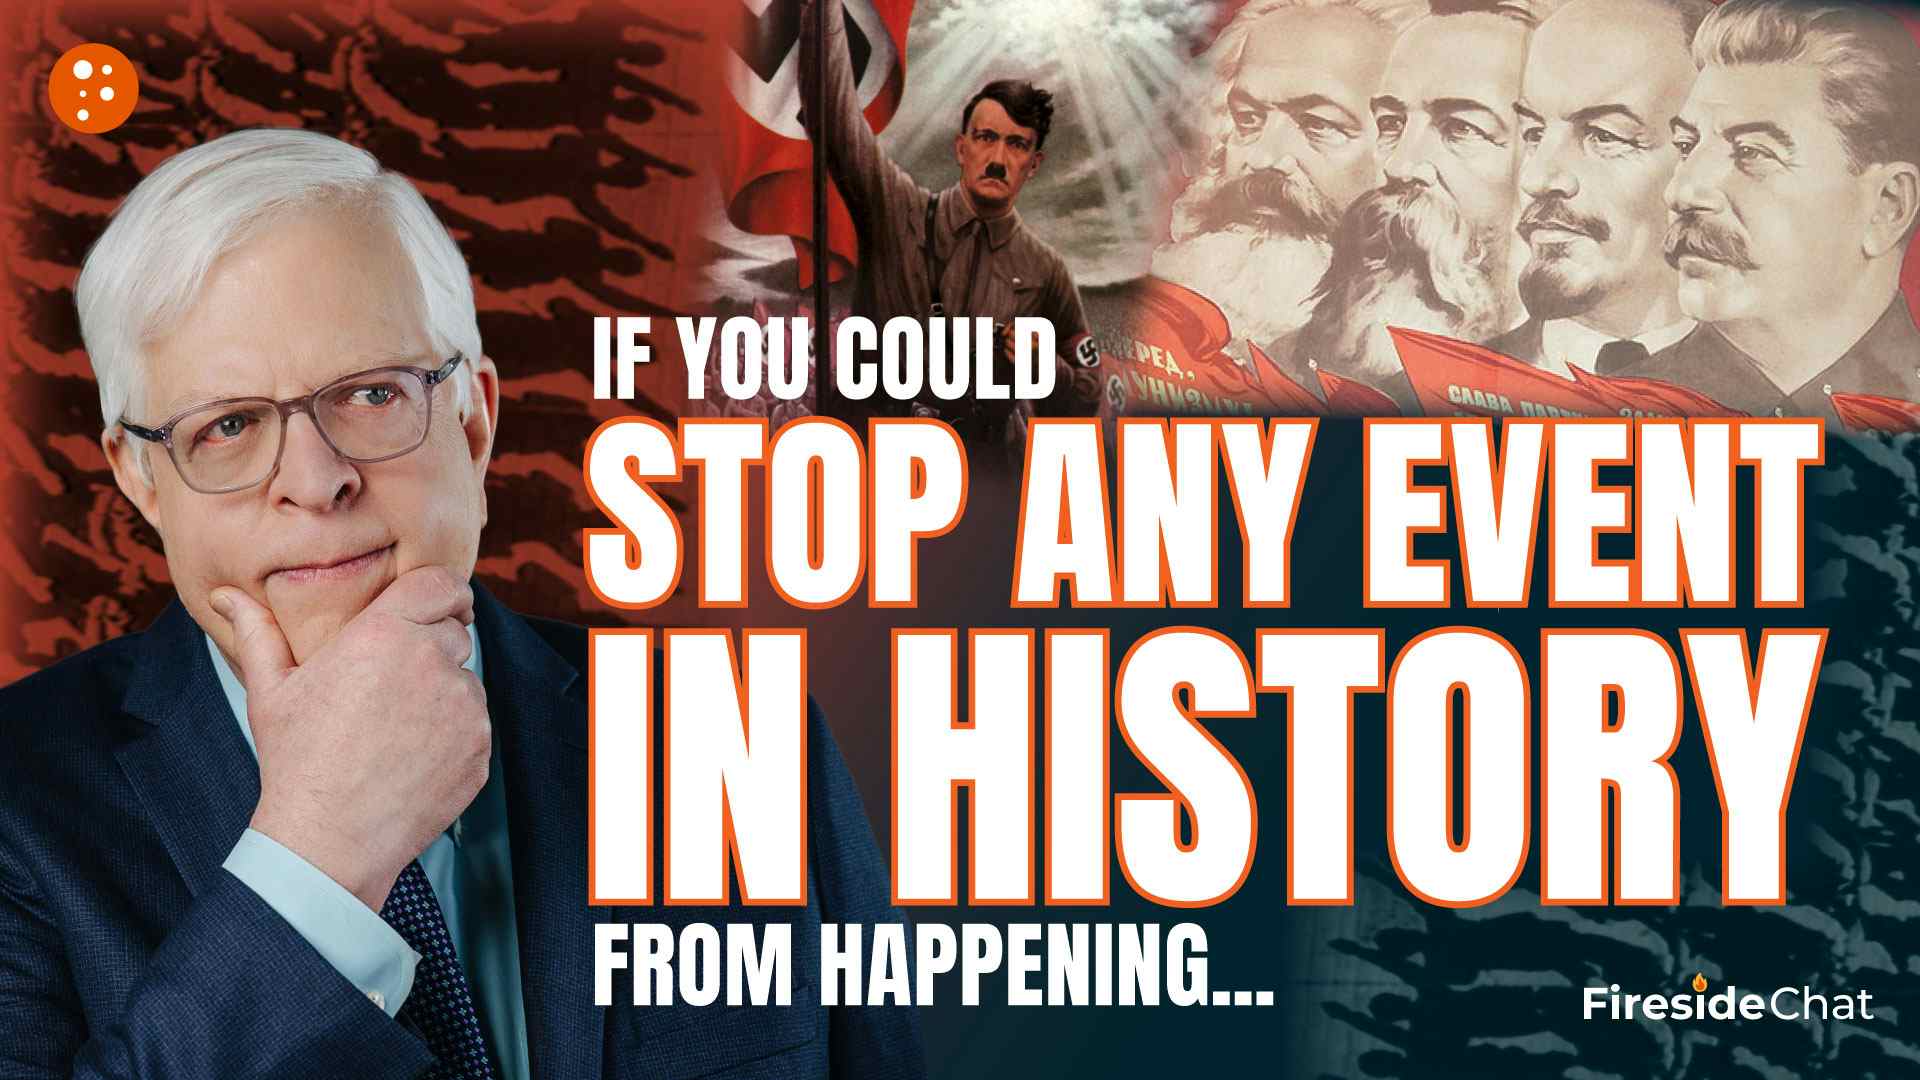 If You Could Stop Any Event in History from Happening...